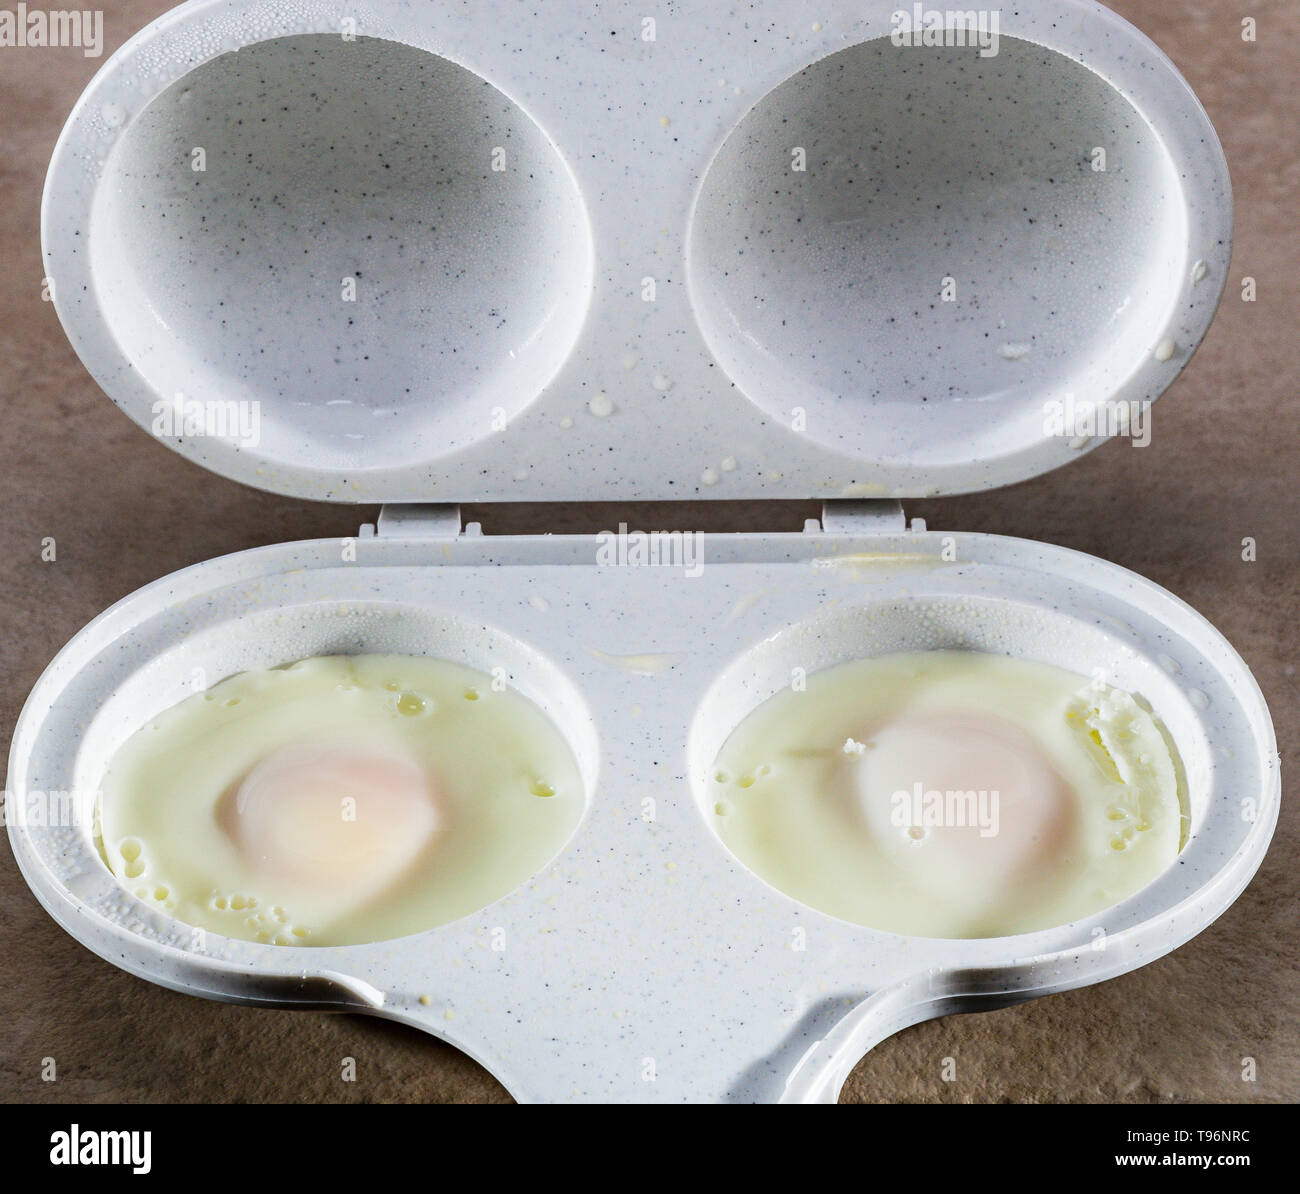 https://c8.alamy.com/comp/T96NRC/microwave-two-egg-cooker-with-two-cooked-eggs-T96NRC.jpg